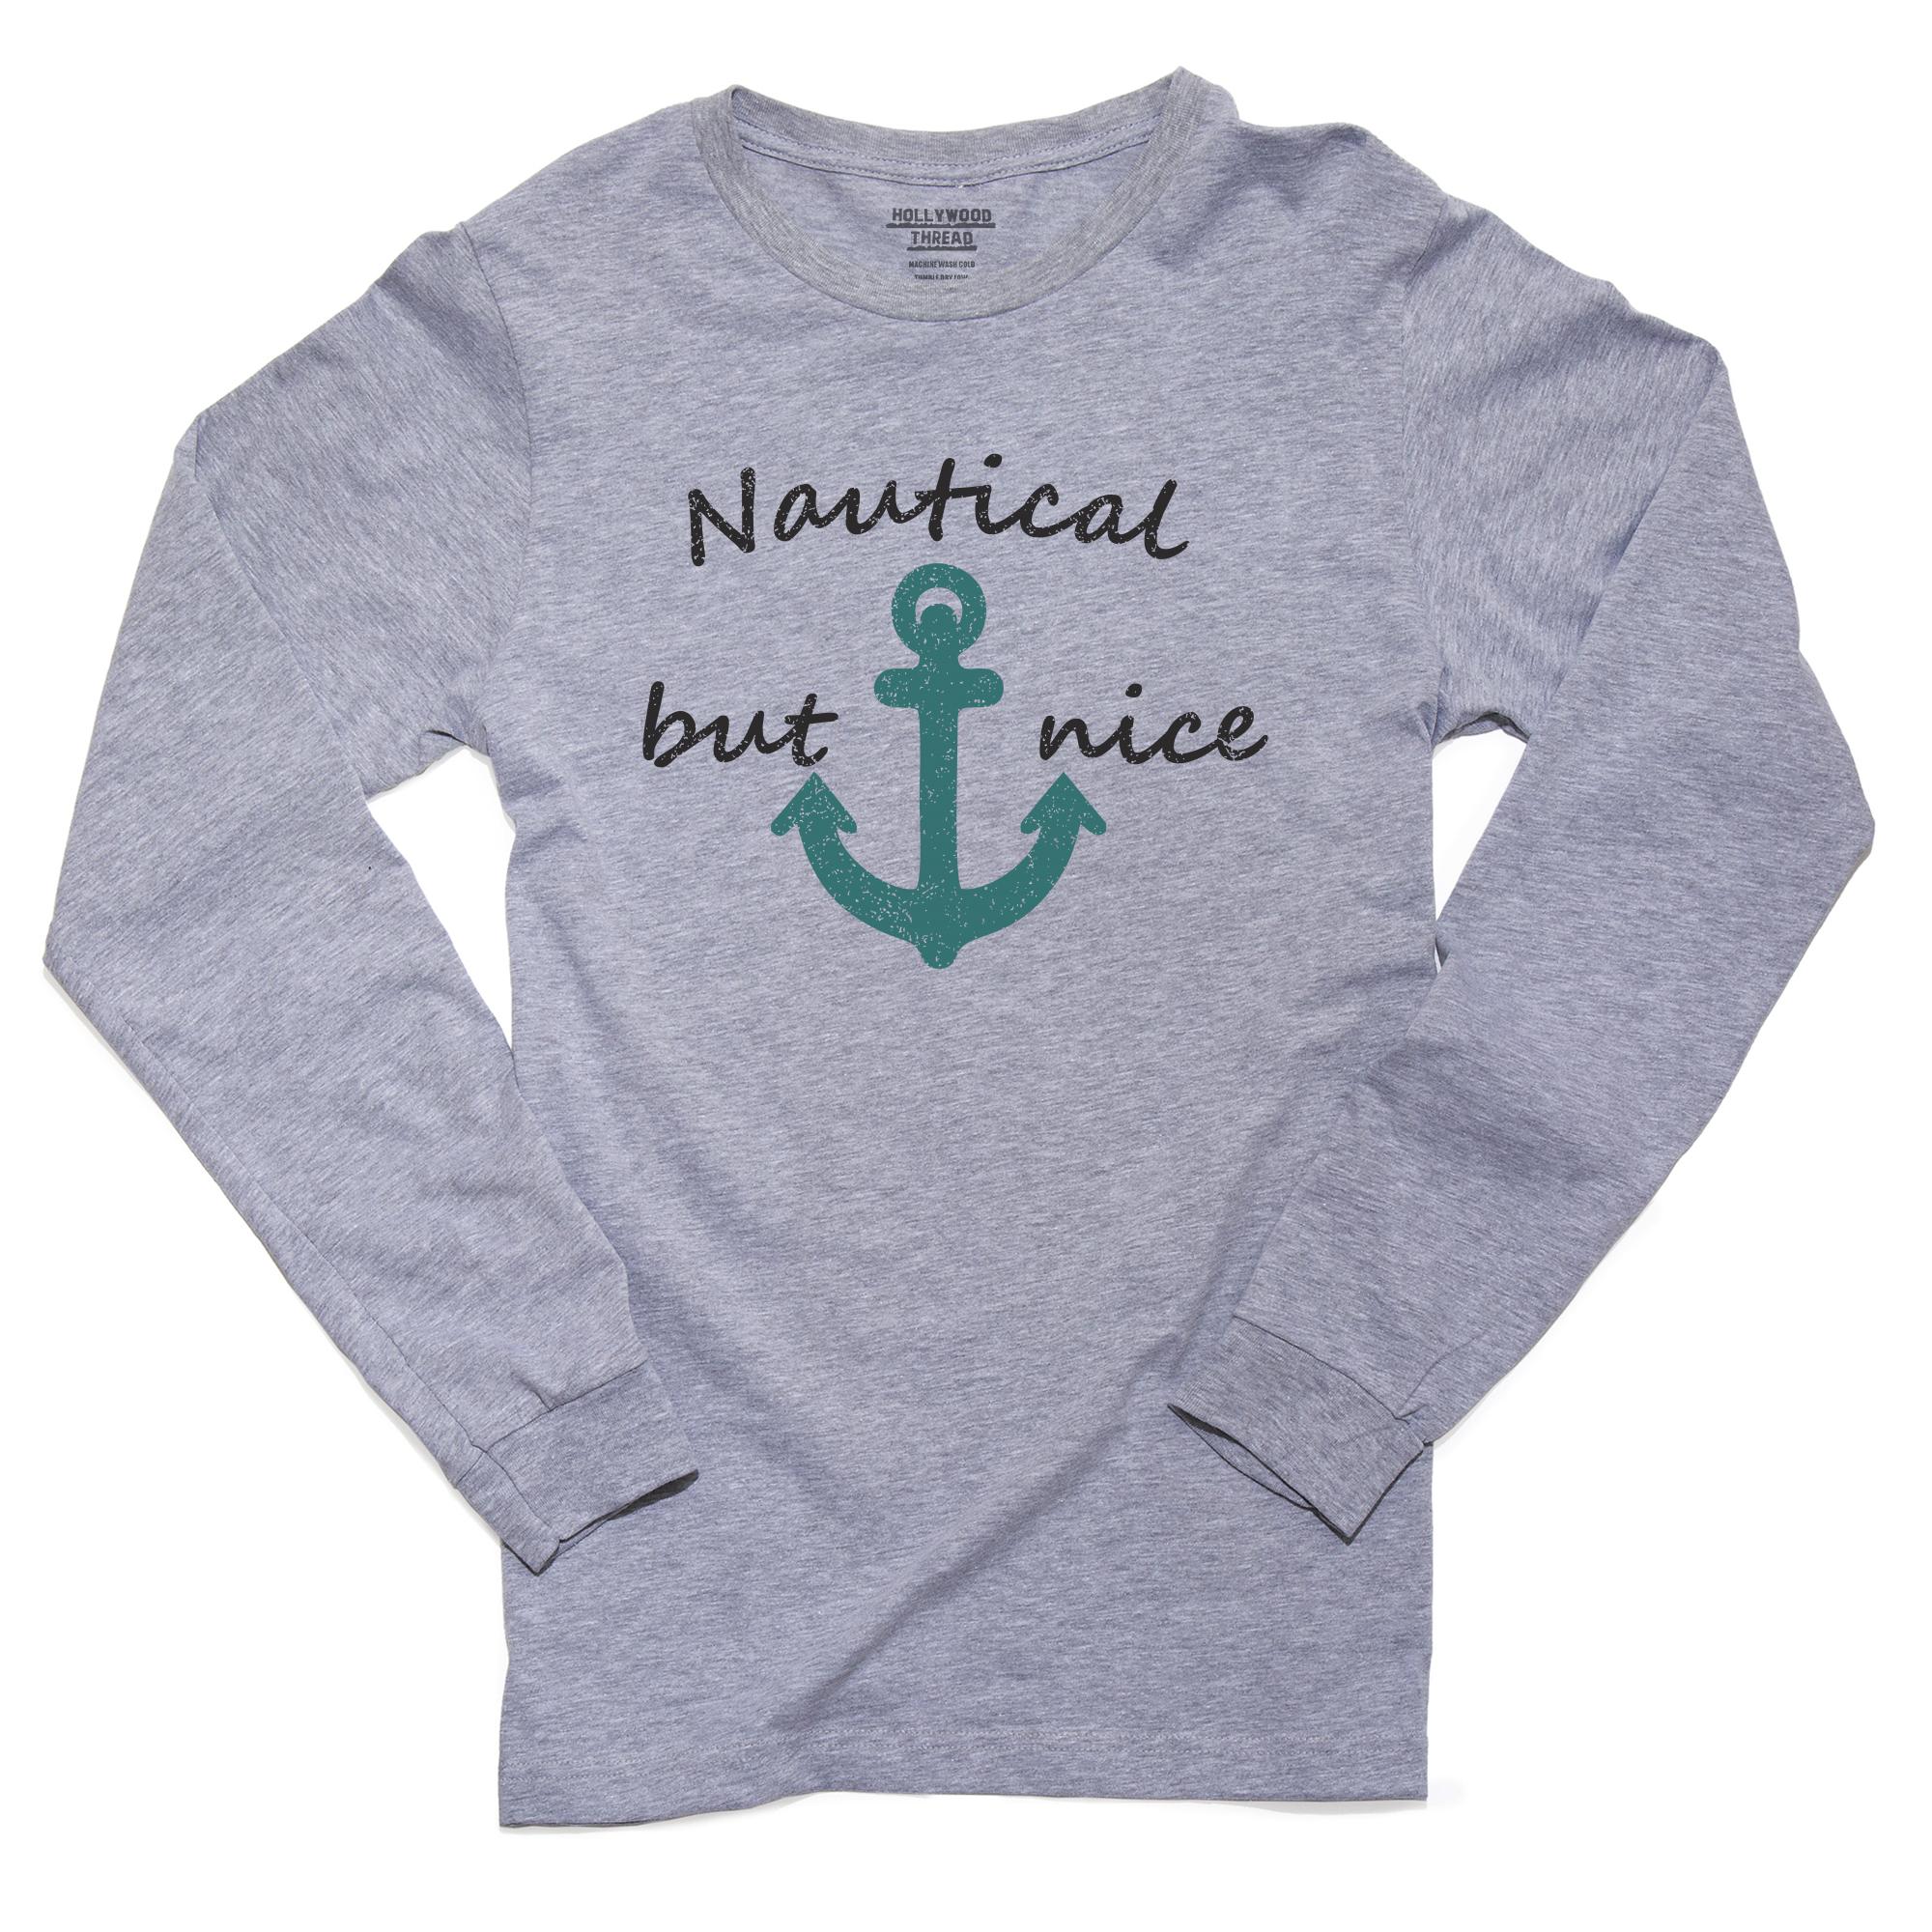 Nautical But Nice - With Sailing Boat Anchor Men's Long Sleeve Grey T ...